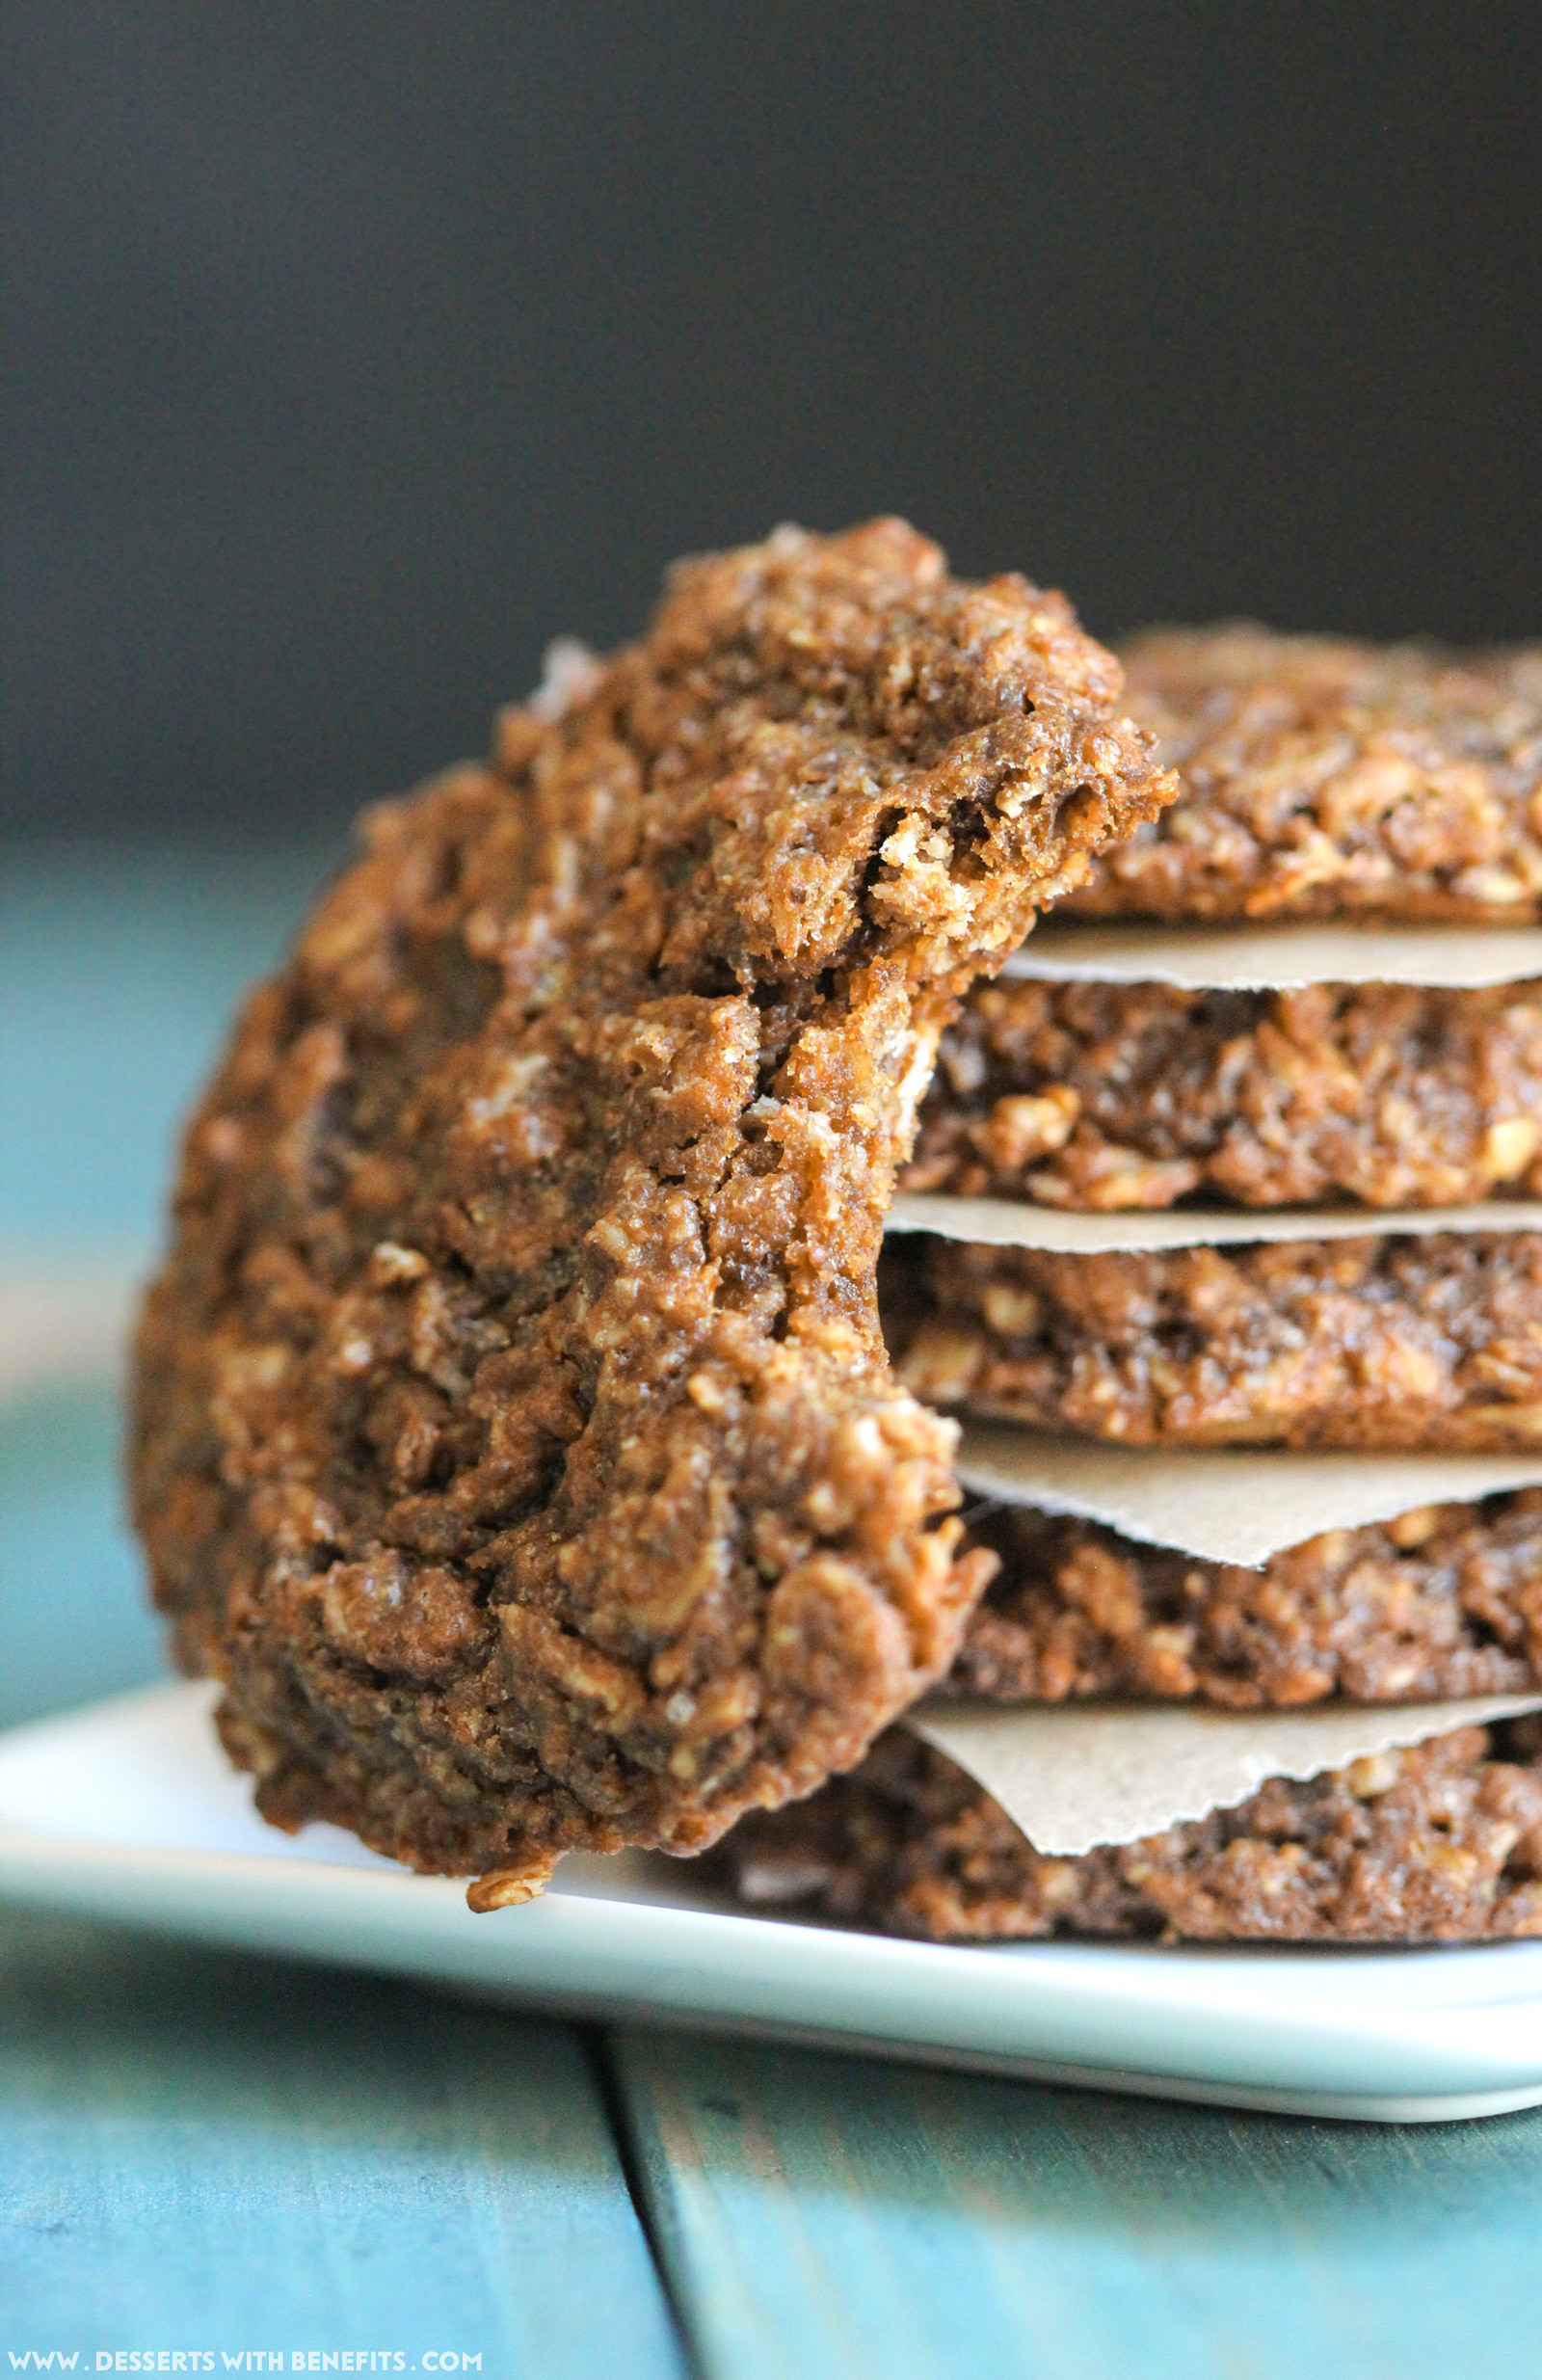 Peanut Butter Oatmeal Cookies Healthy
 Healthy Chewy Peanut Butter Oatmeal Cookies recipe gluten